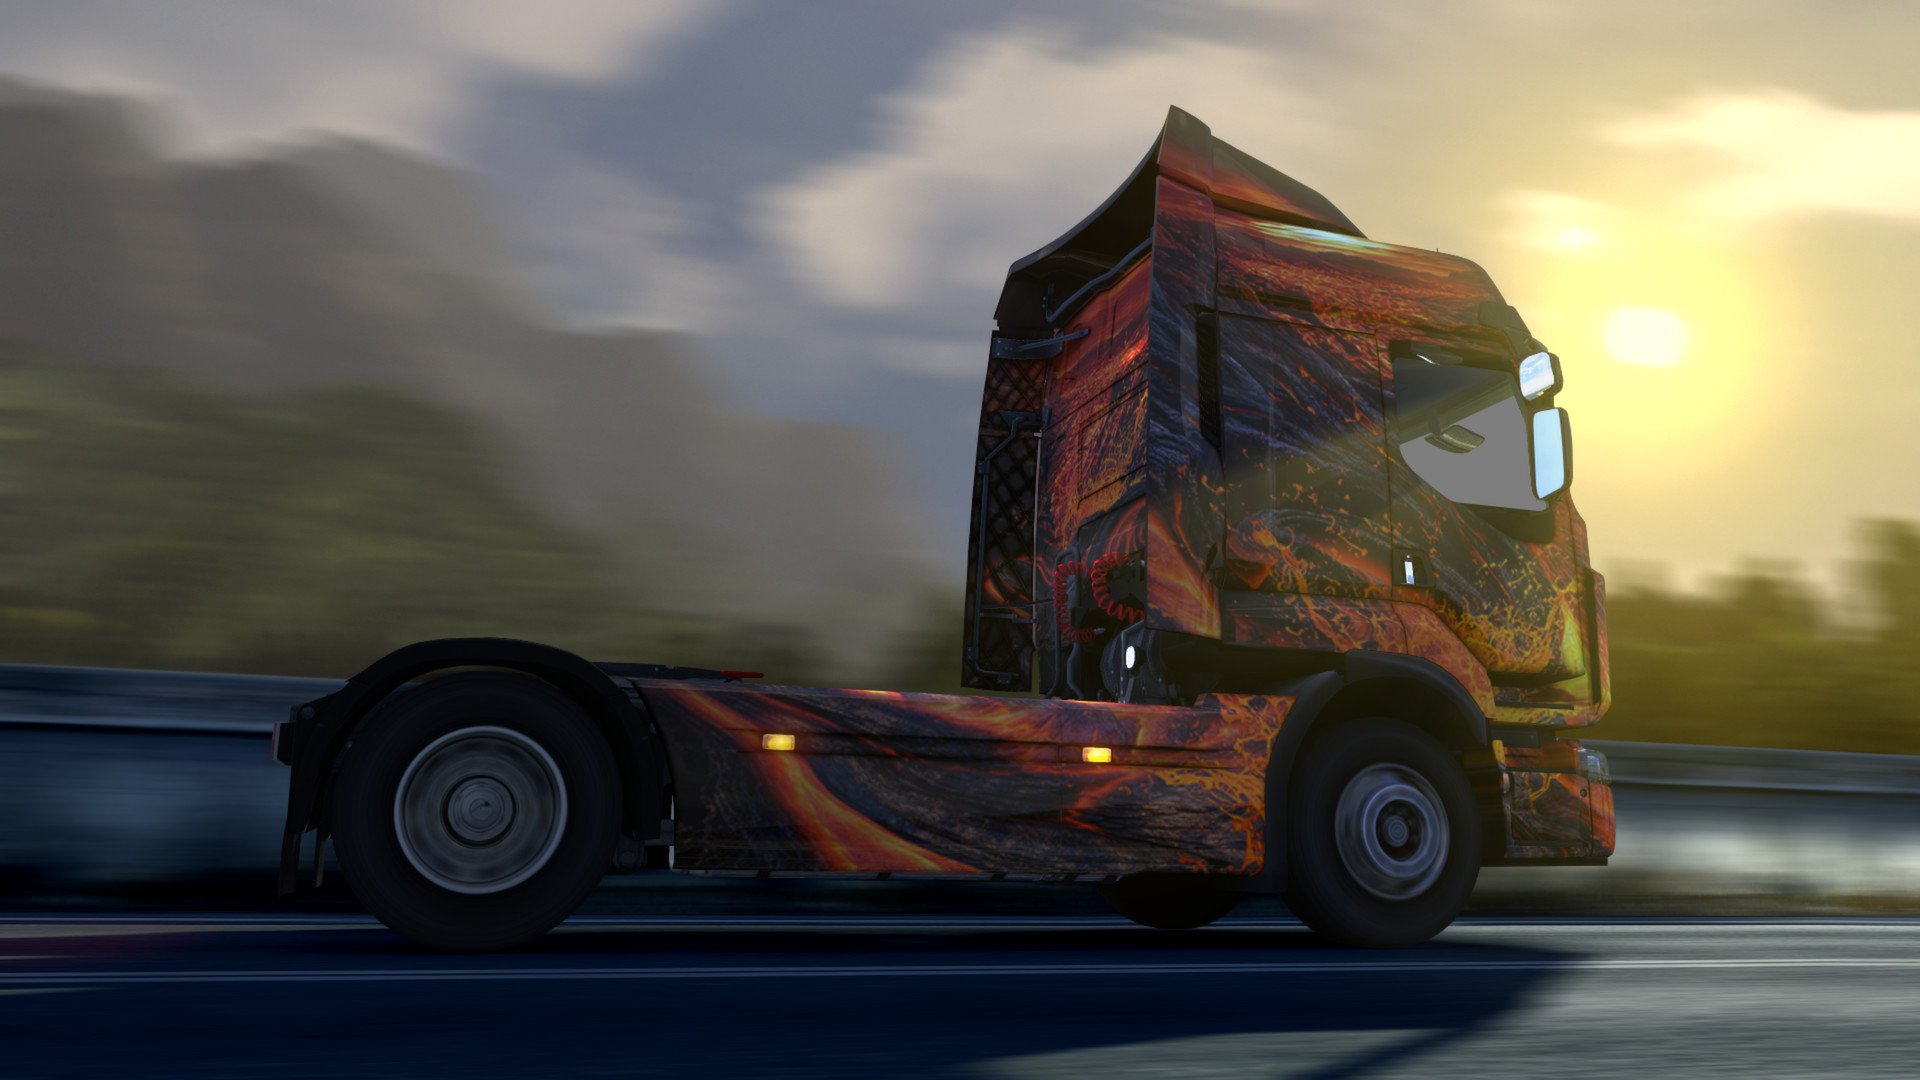 Euro Truck Simulátor 2 Force of Nature Paint Jobs Pack 2